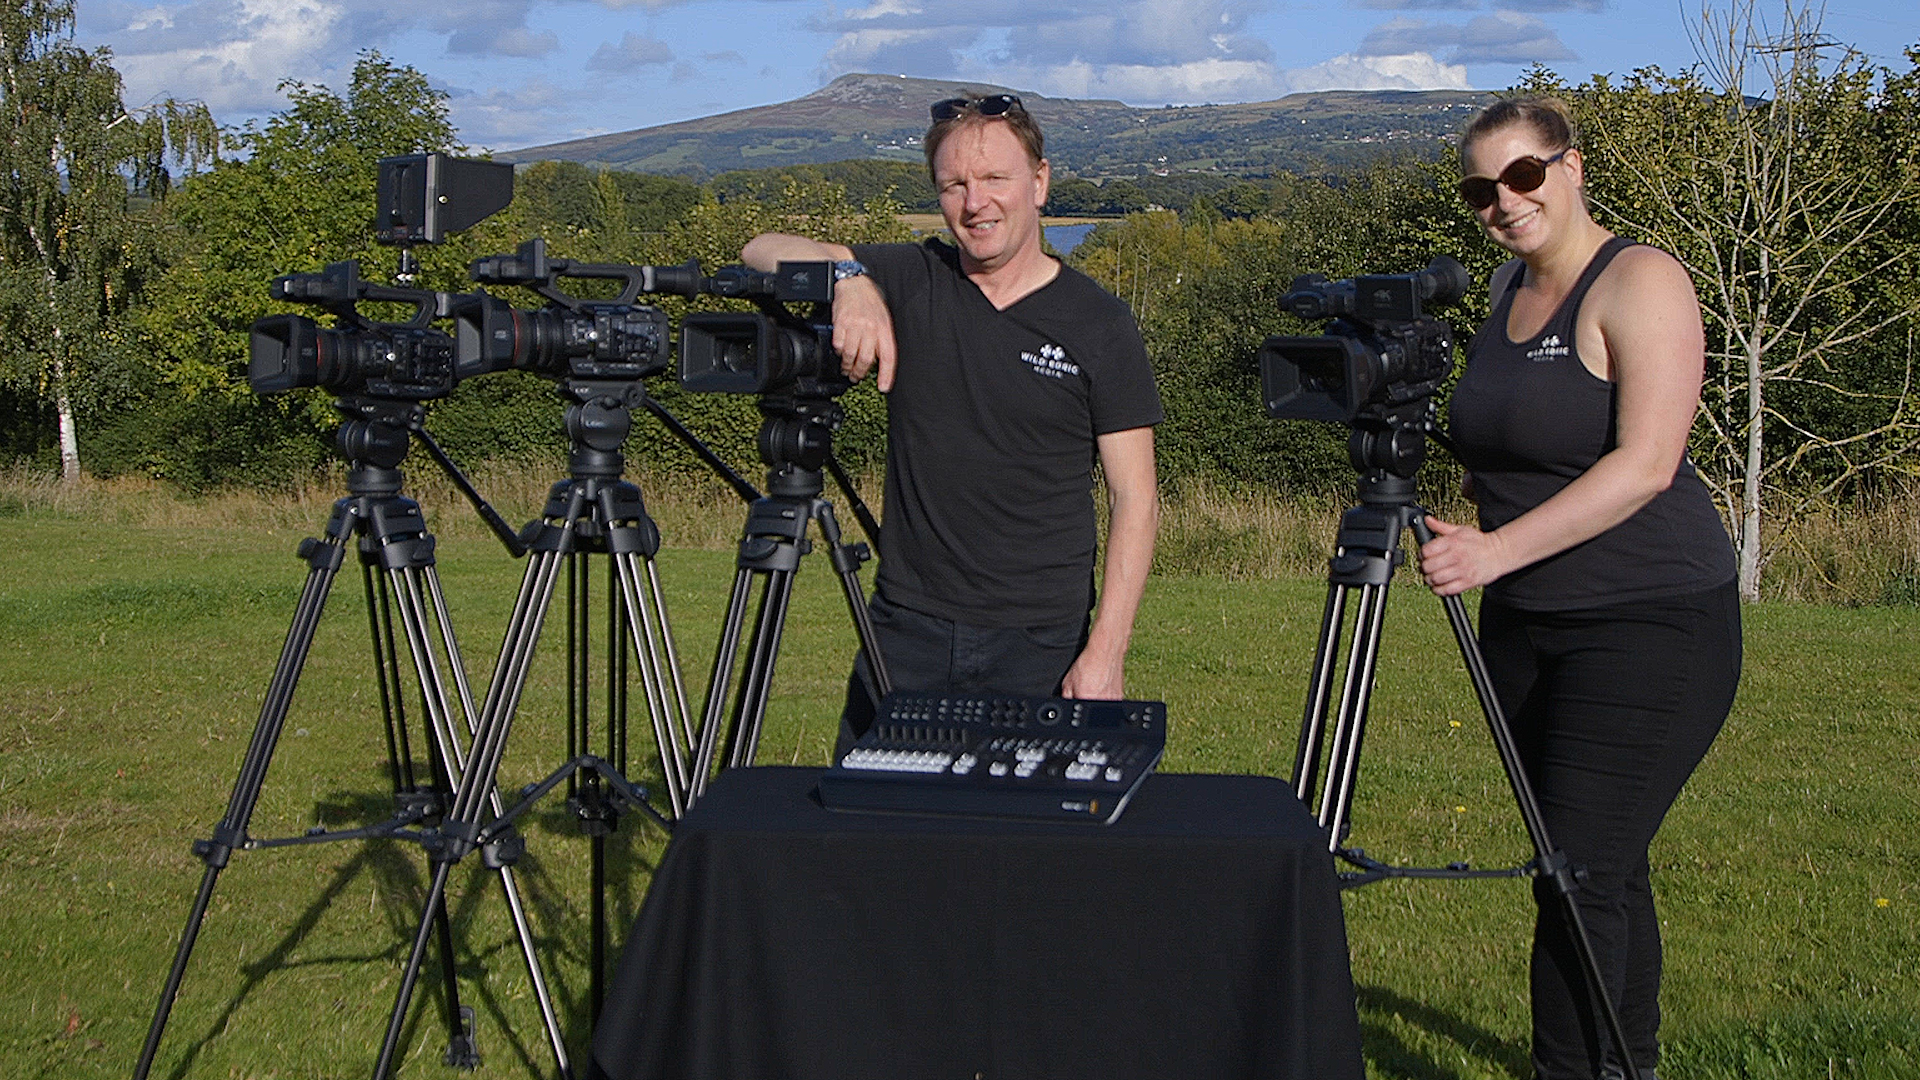 FEATURED | Film production company set for growth thanks to new grant